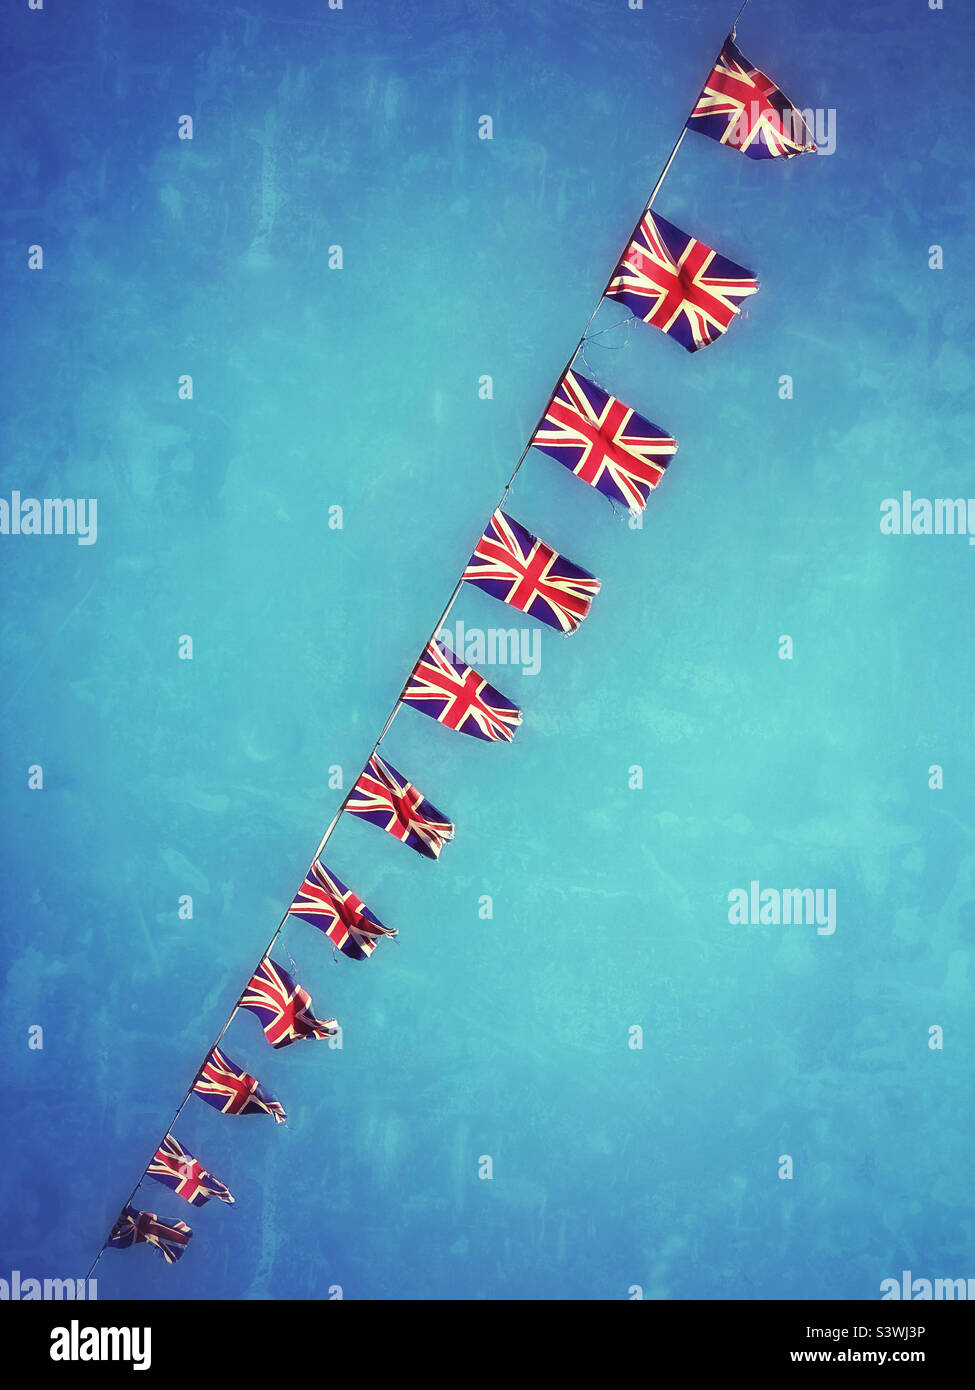 A grunge & retro effect image of a line of Union Jack flags. Bunting, fluttering in the wind of a UK Summer’s day, celebrating the Queen’s Platinum Jubilee. Photo ©️ COLIN HOSKINS. Stock Photo